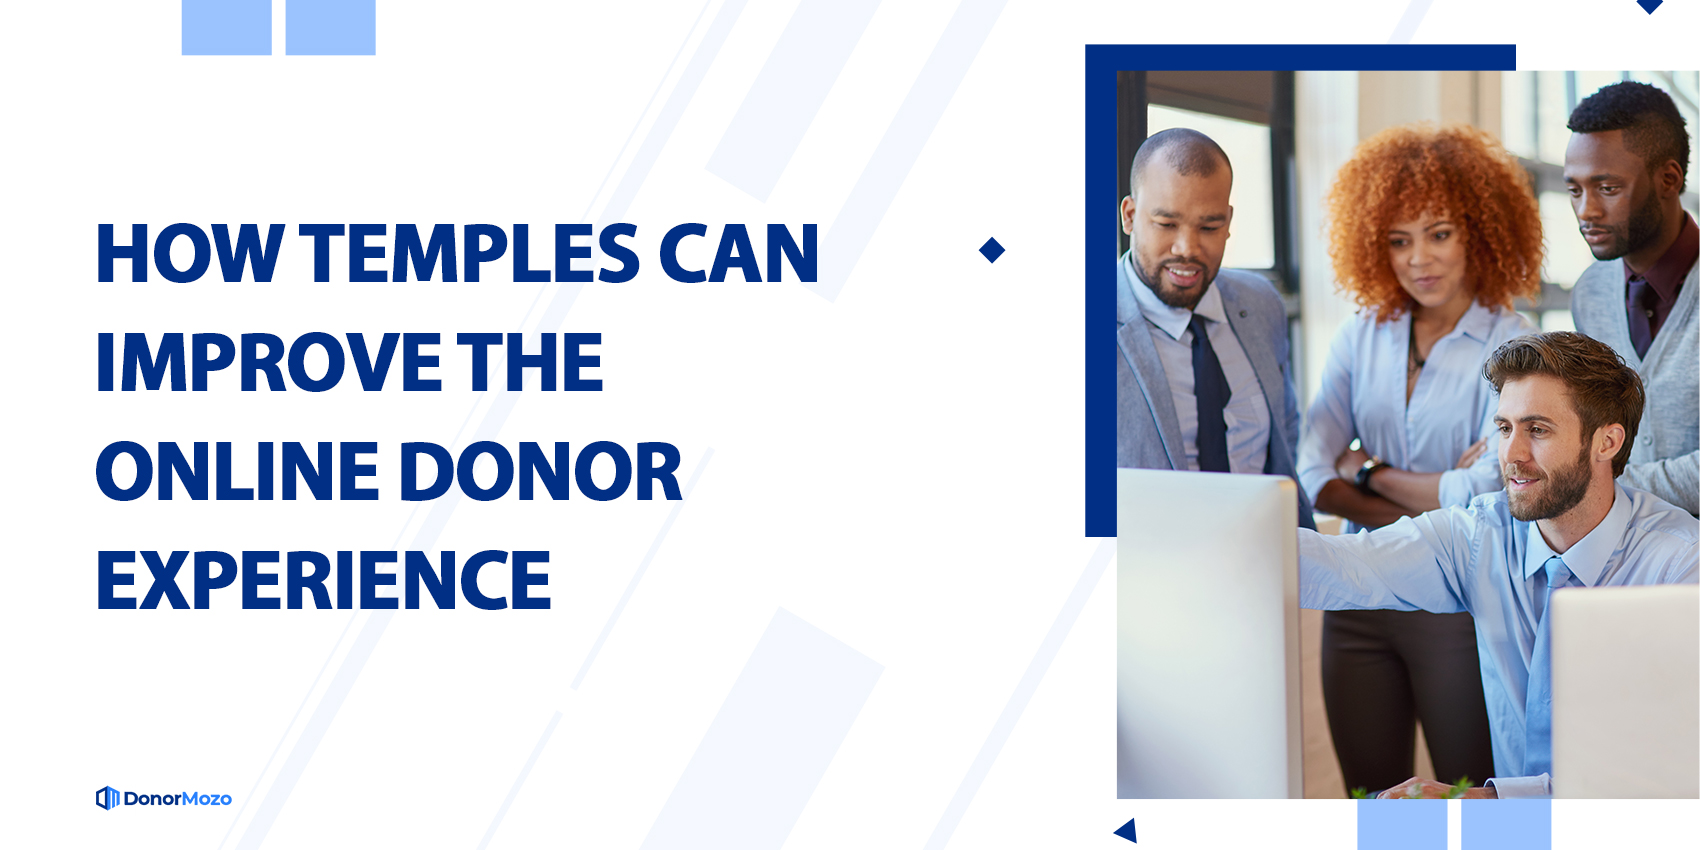 How Temples Can Improve the Online Donor Experience